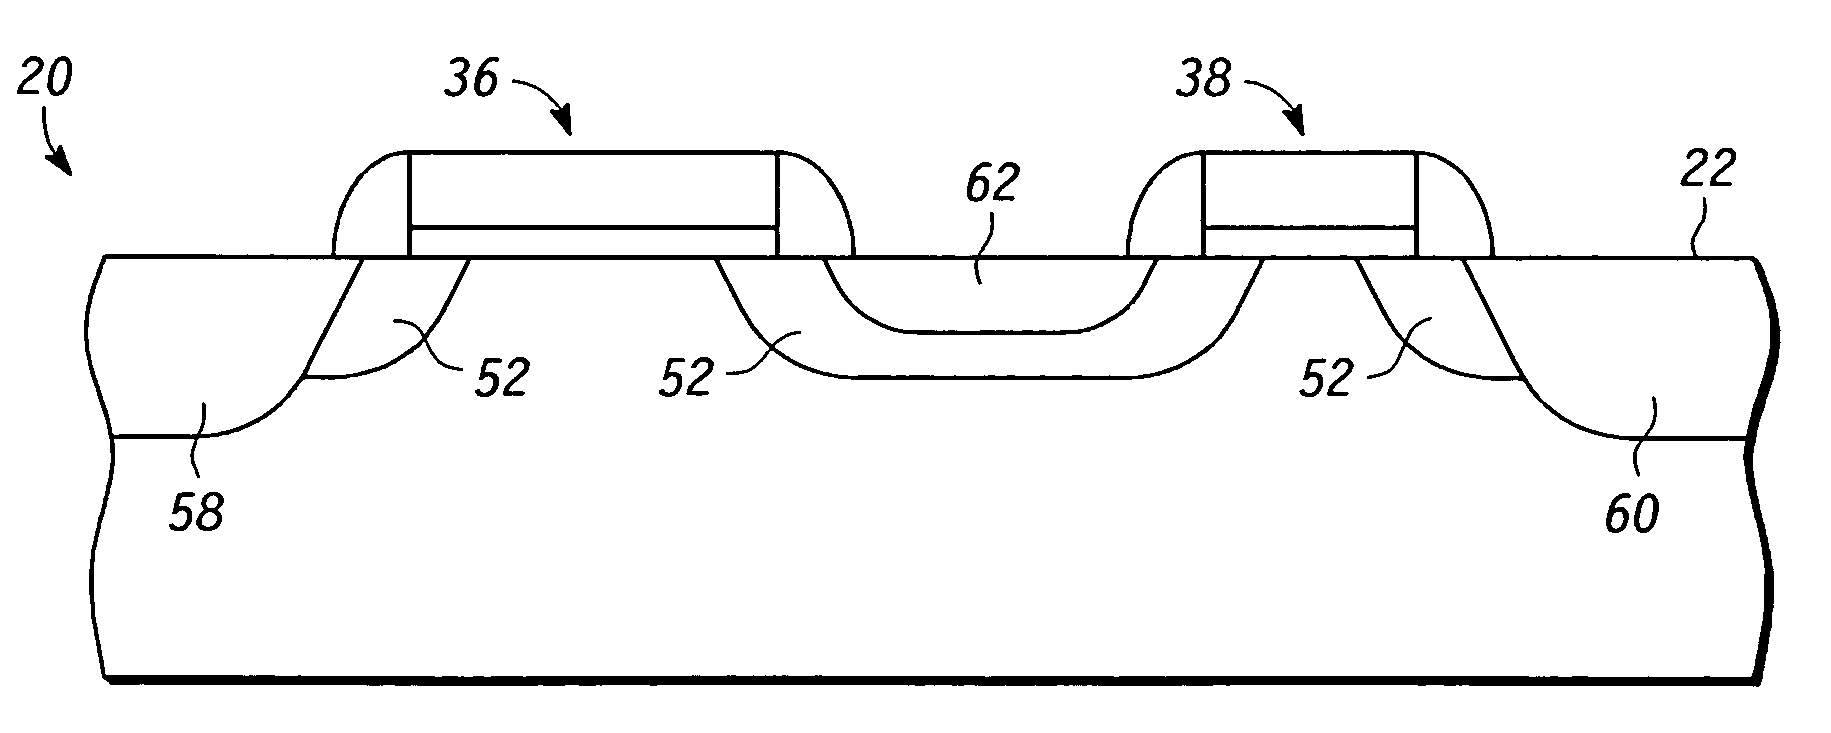 Multi-gate semiconductor device and method for forming the same